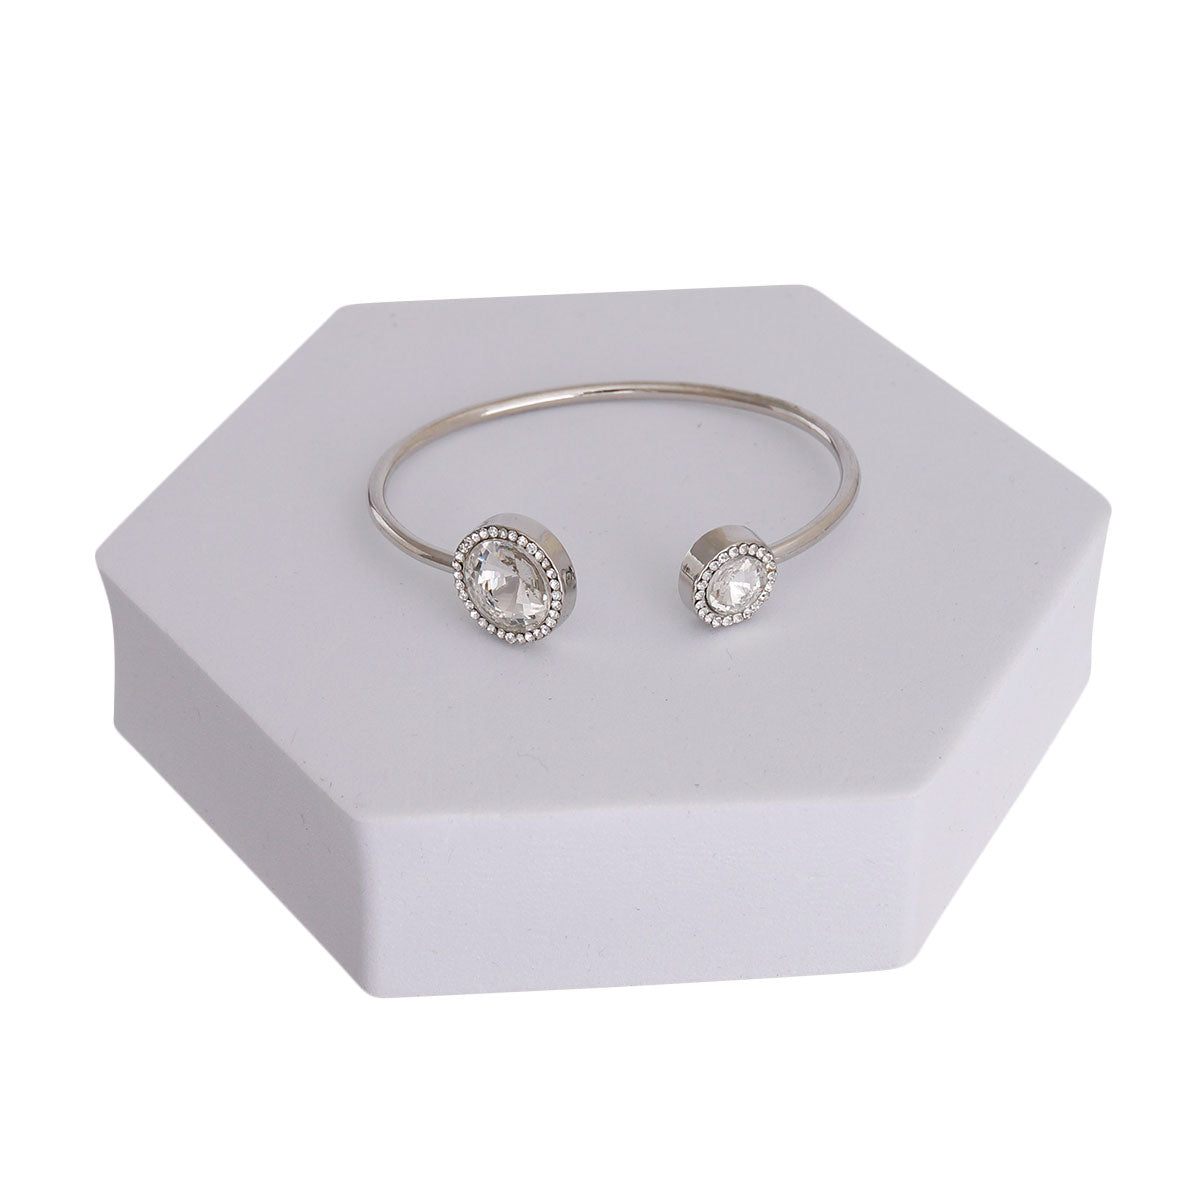 Silver Round Crystal Bangle